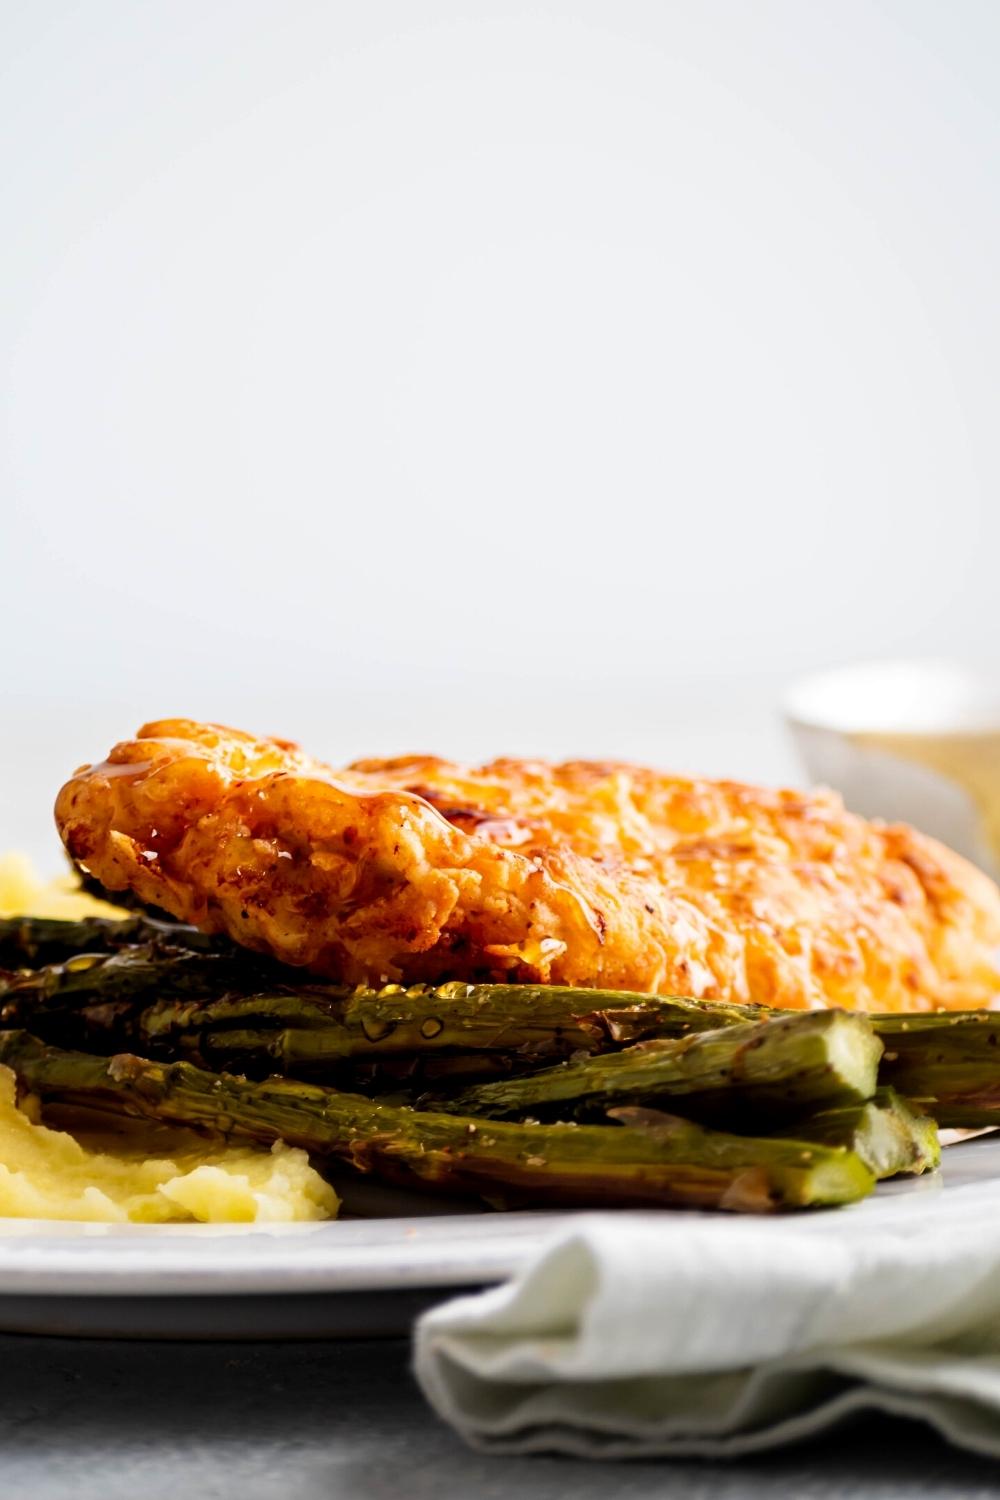 A piece of truffle honey chicken on part of asparagus on part of some mashed potatoes on part of a white plate